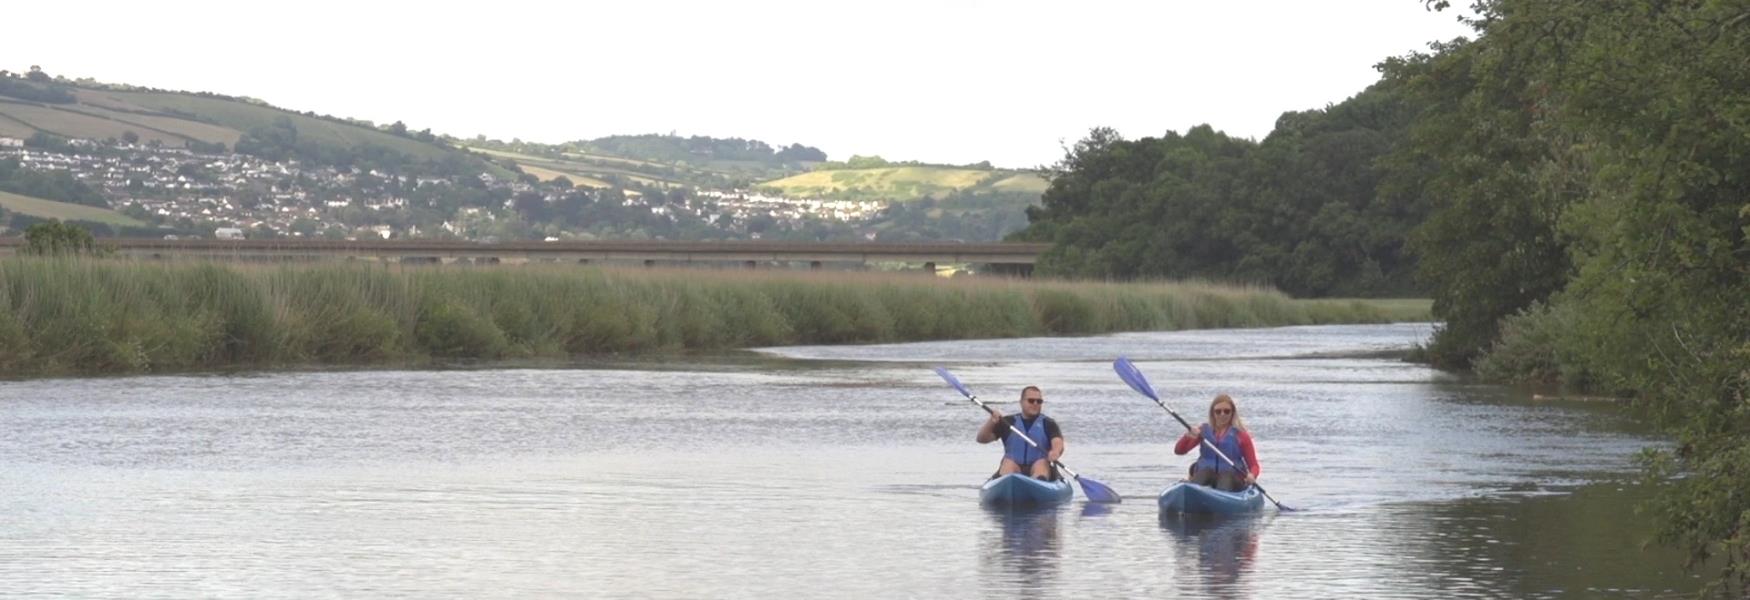 Kaykaying on The River Teign